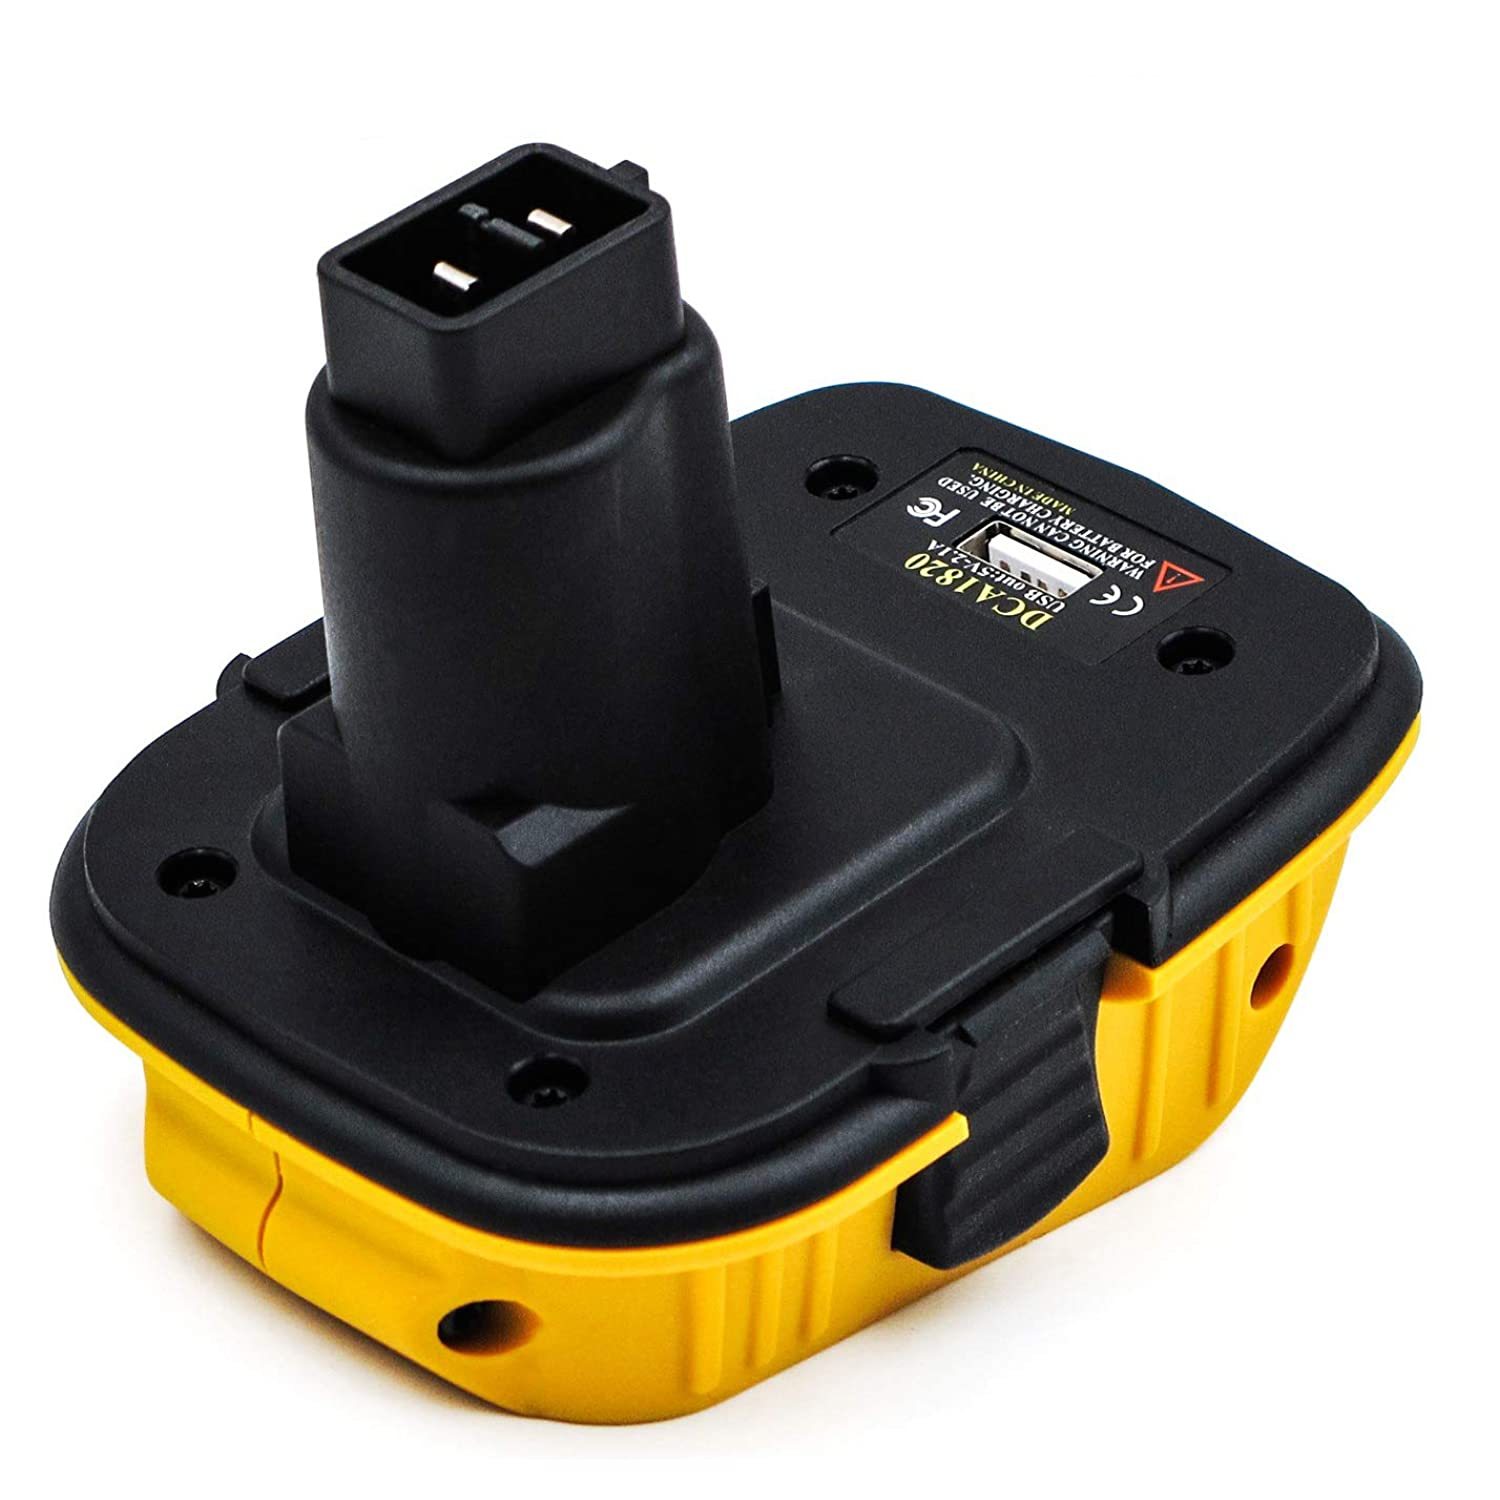 Primary image for Dca1820 Battery Adapter Replacement For Dewalt 18V To 20V,Compatible W